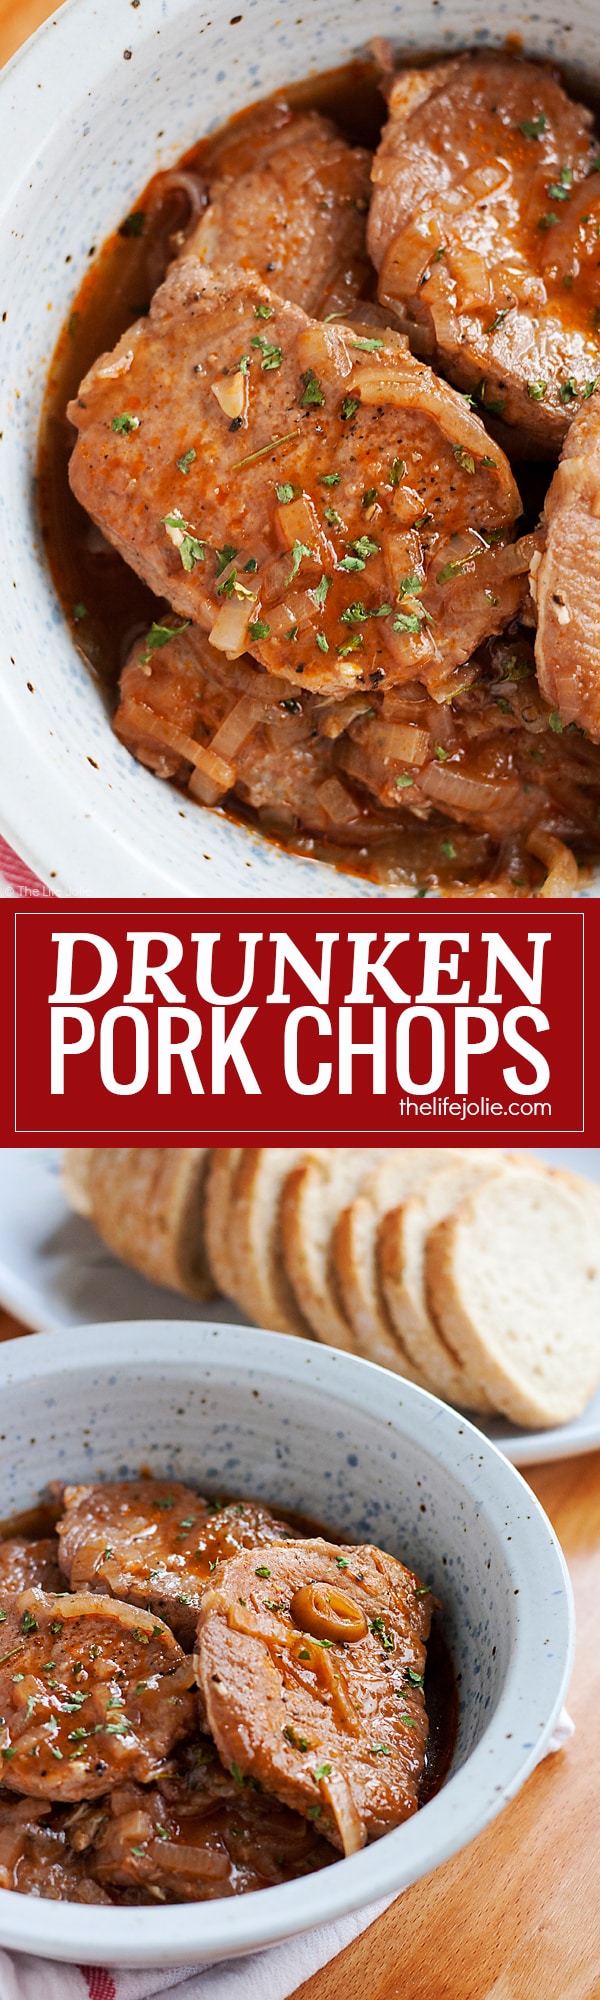 Drunken Pork Chops is one of the easiest dinner recipes for busy families. This is low-maintenance cooking at it's finest that makes the most delicious, savory sauce with simple ingredients like red wine and onions- even your kids will love it (don't worry, the alcohol cooks off)!